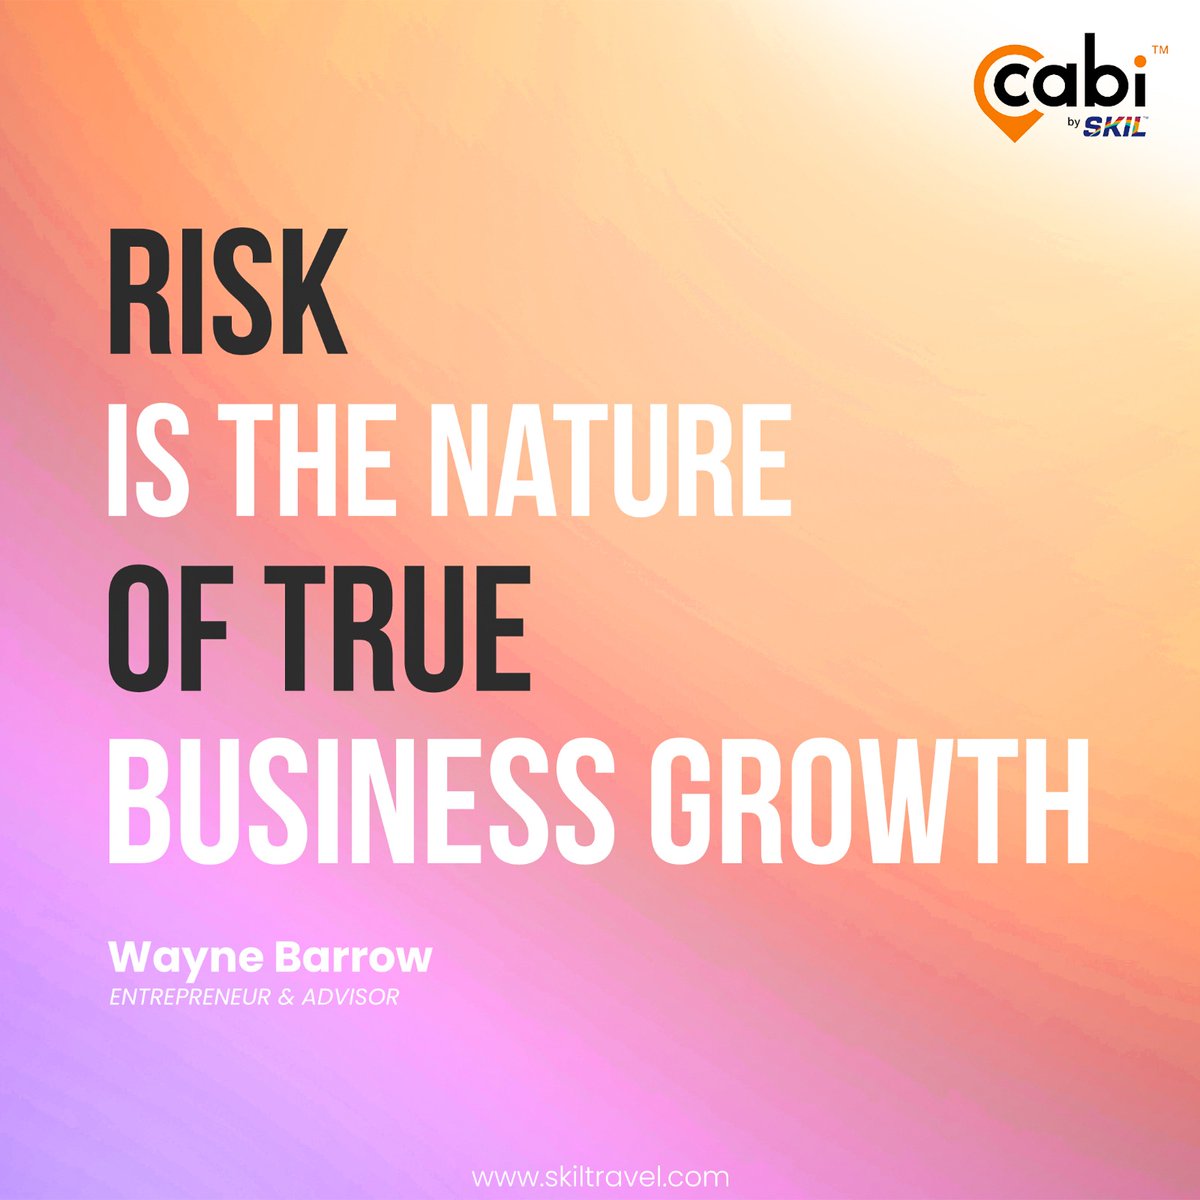 Comfort is tempting, but growth demands calculated risks. Research, plan & manage them – that's the key to unlocking sustainable business success. #CABI #CabibySKIL #corporatecab #BusinessGrowth #CalculatedRisk #Innovation #Entrepreneurship #MarketExpansion #Agility #Disruption